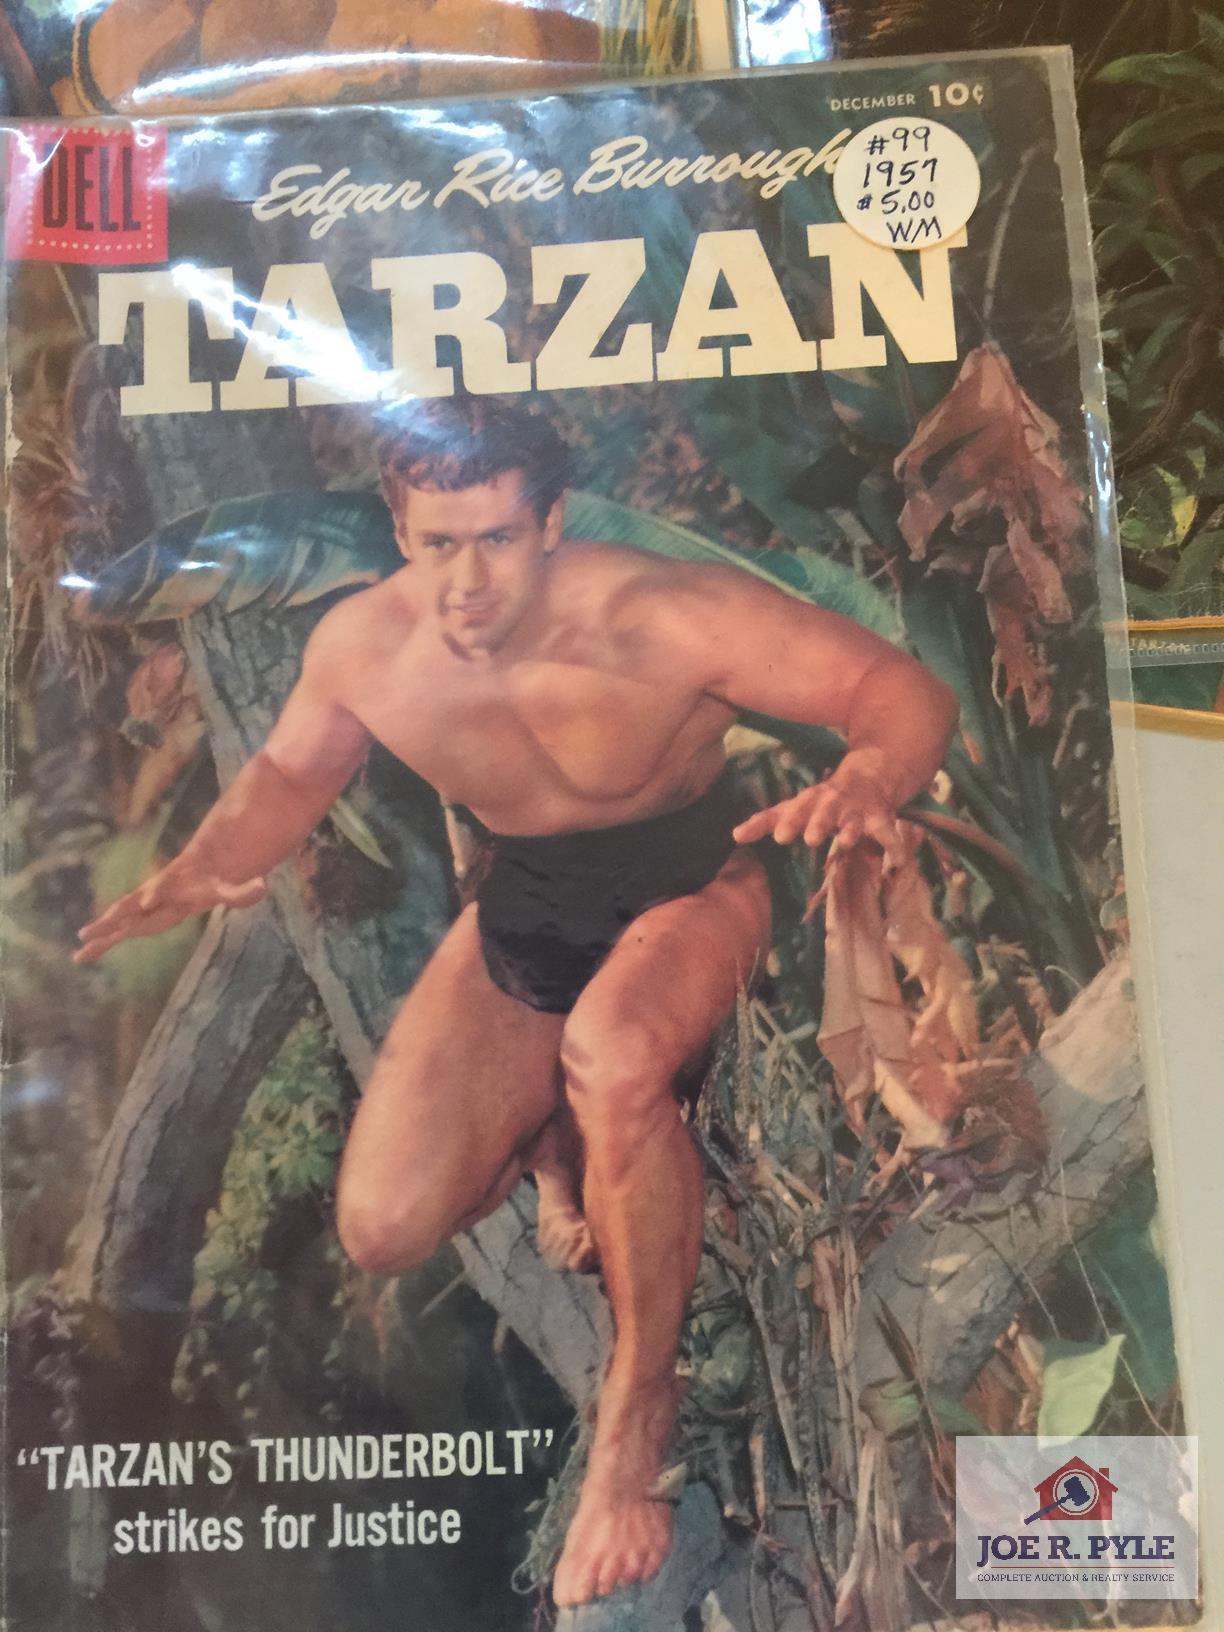 Lot of thirteen (13) 1950's Tarzan 10 cent comic books average condition with wear